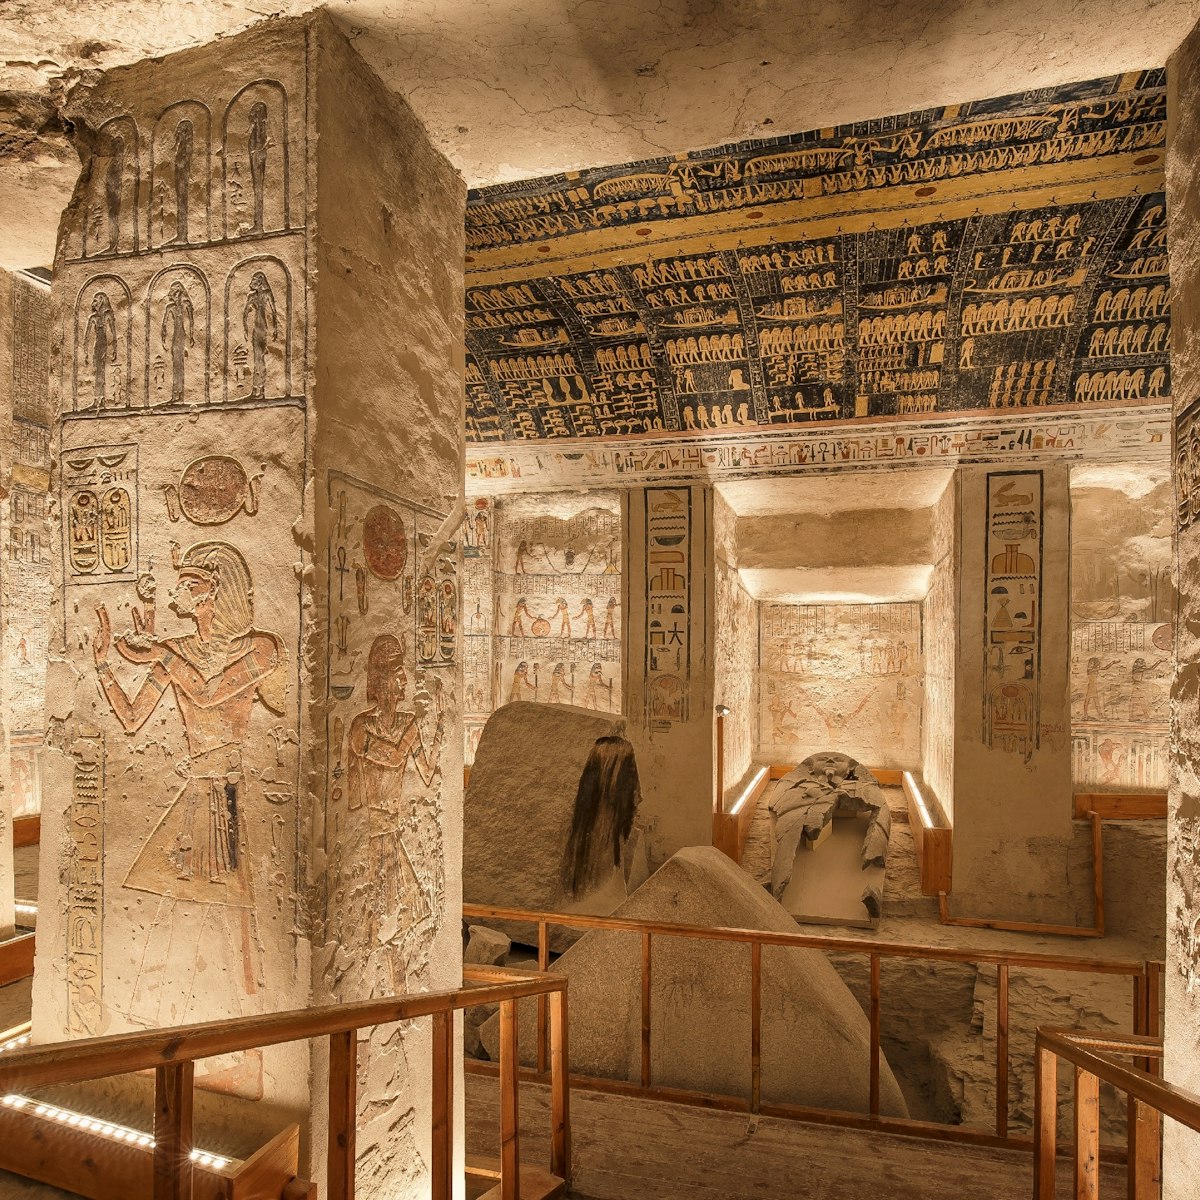 Ramesses VI tomb in Valley of the Kings, Luxor, Egypt.